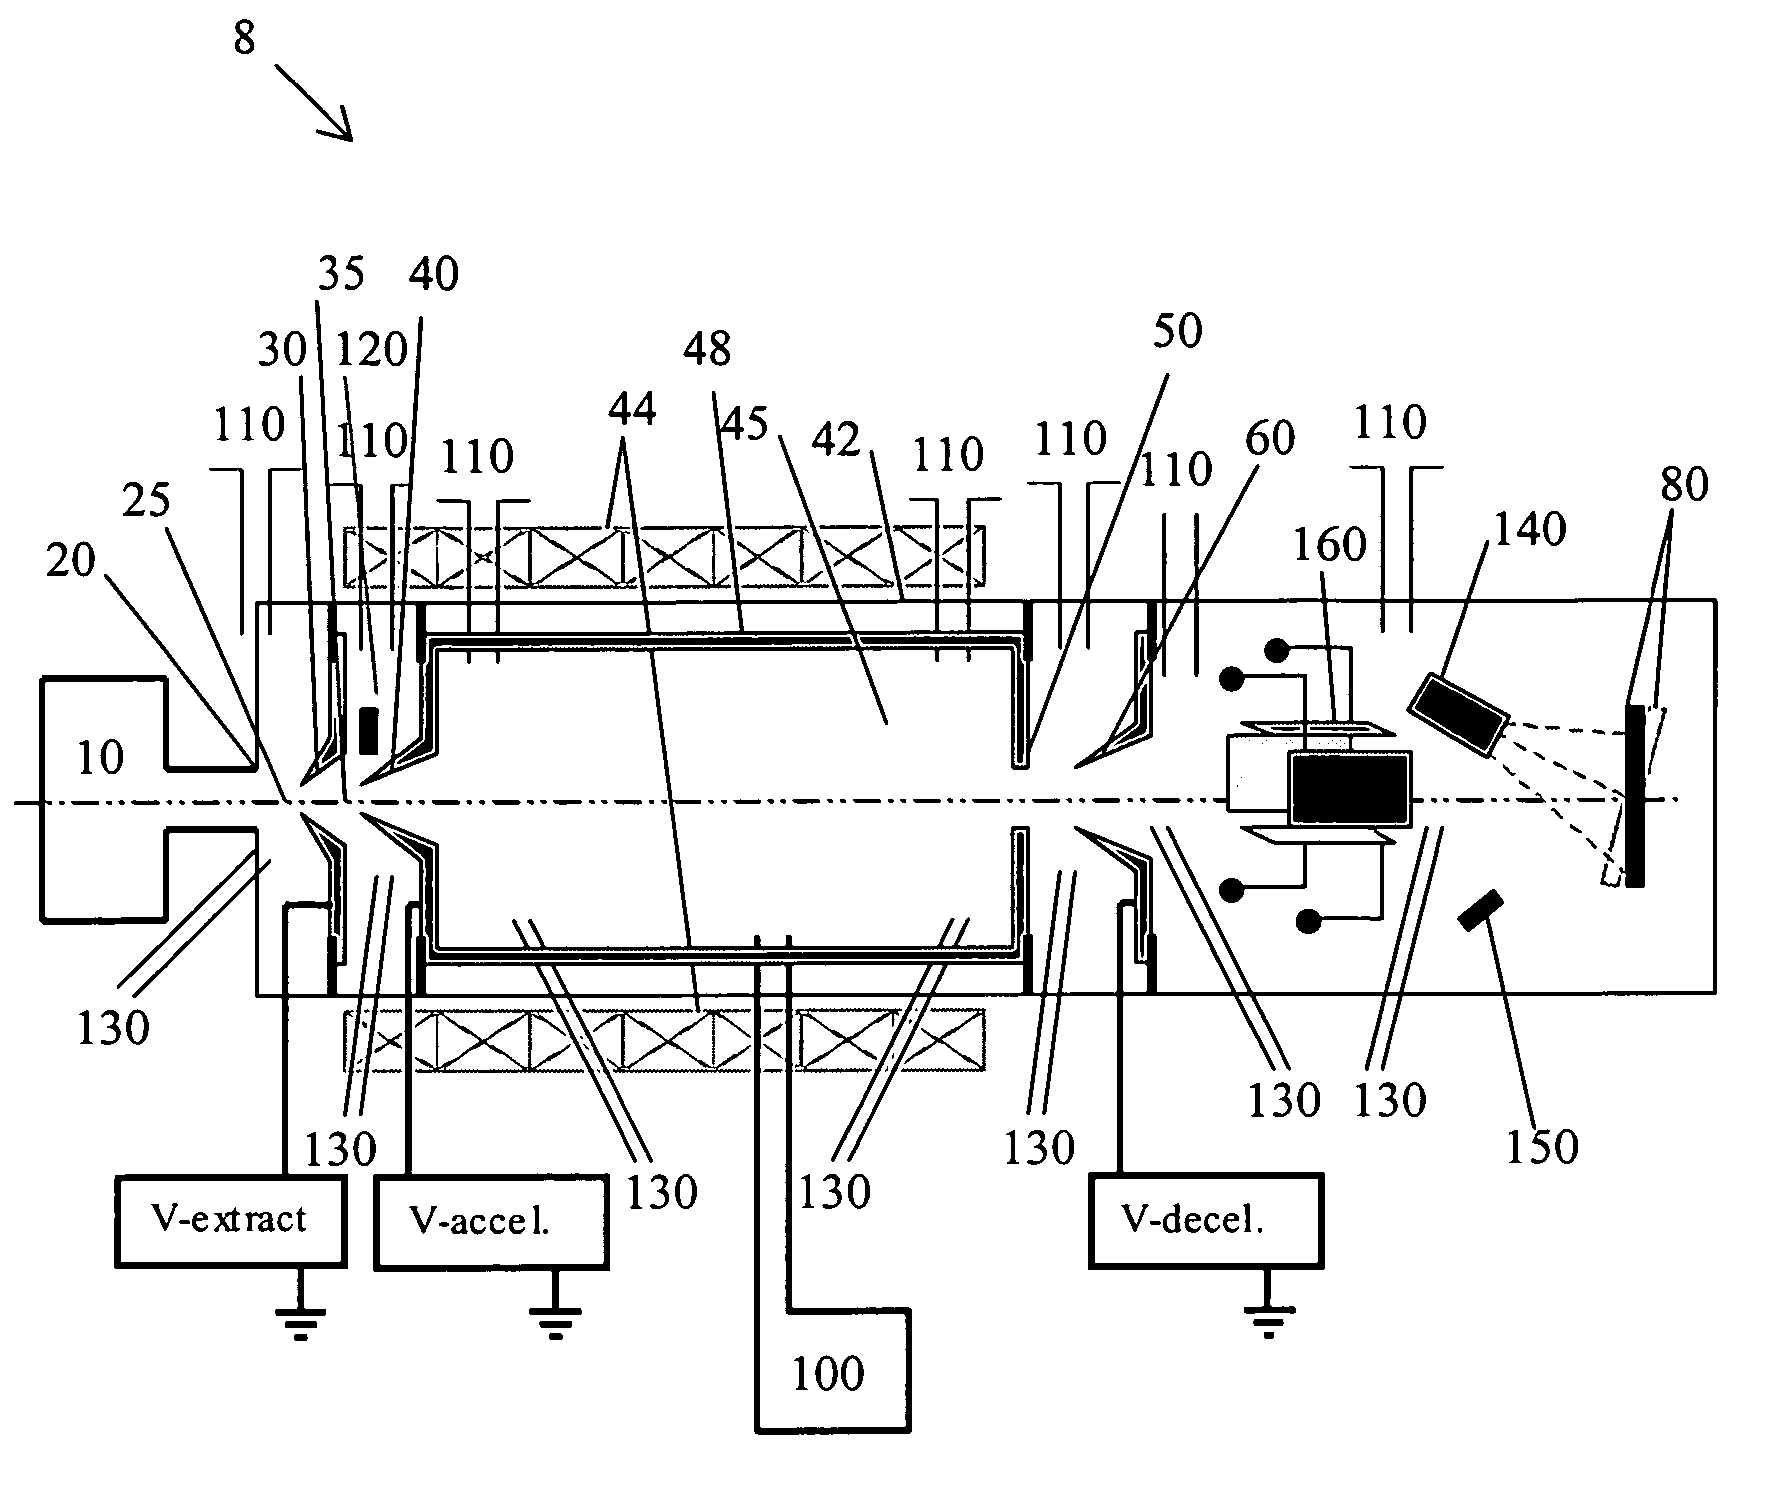 Particle processing apparatus and methods